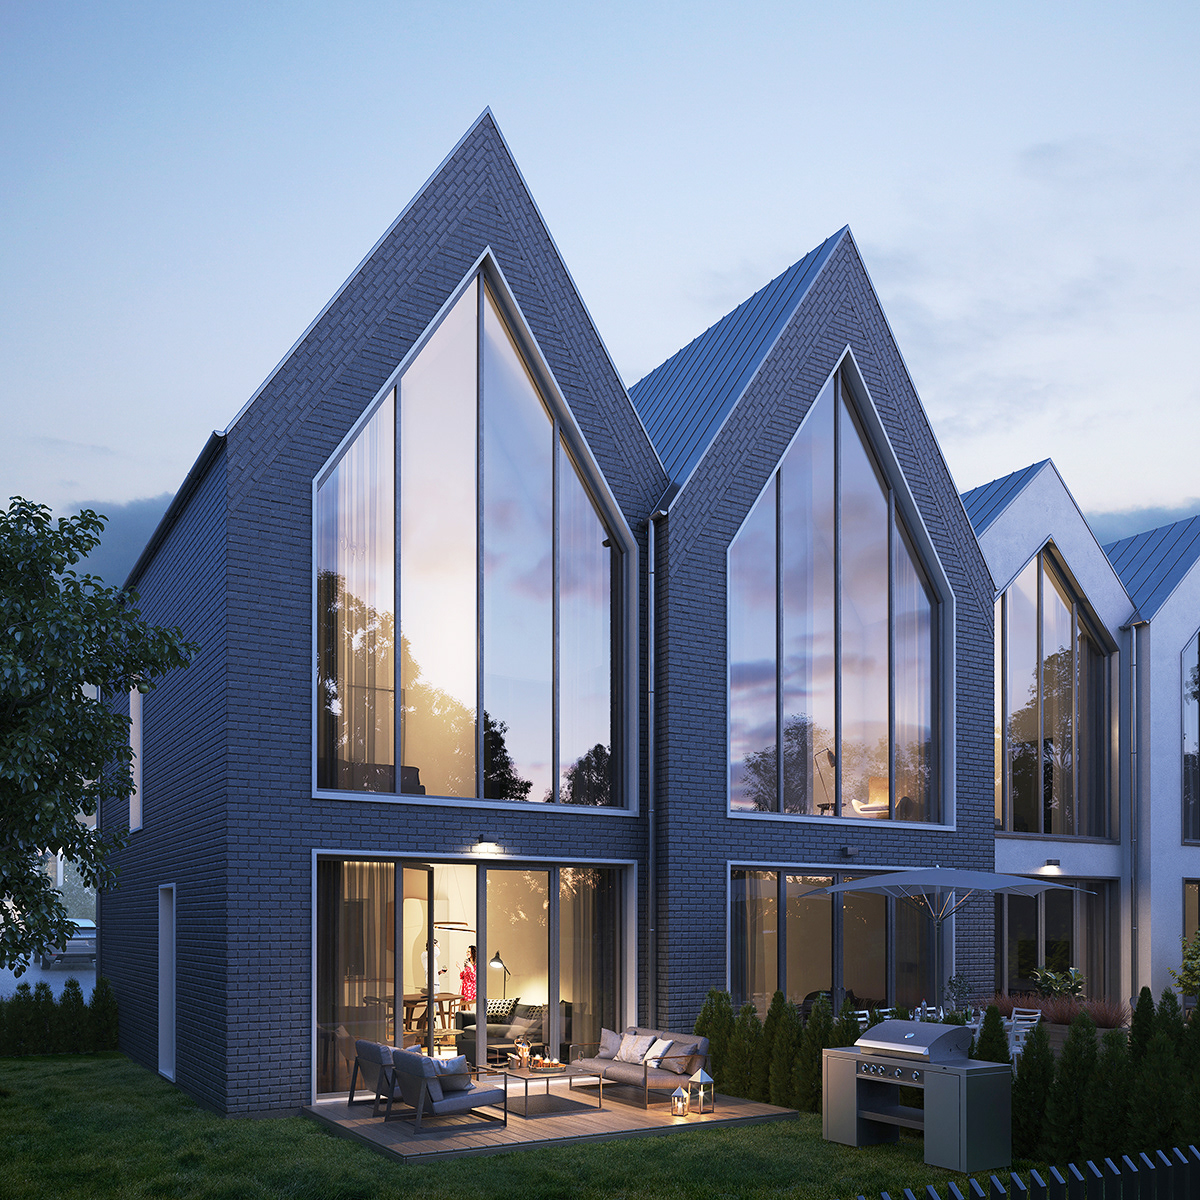 architectural visualization visualisation norway lithuania finland Sweden